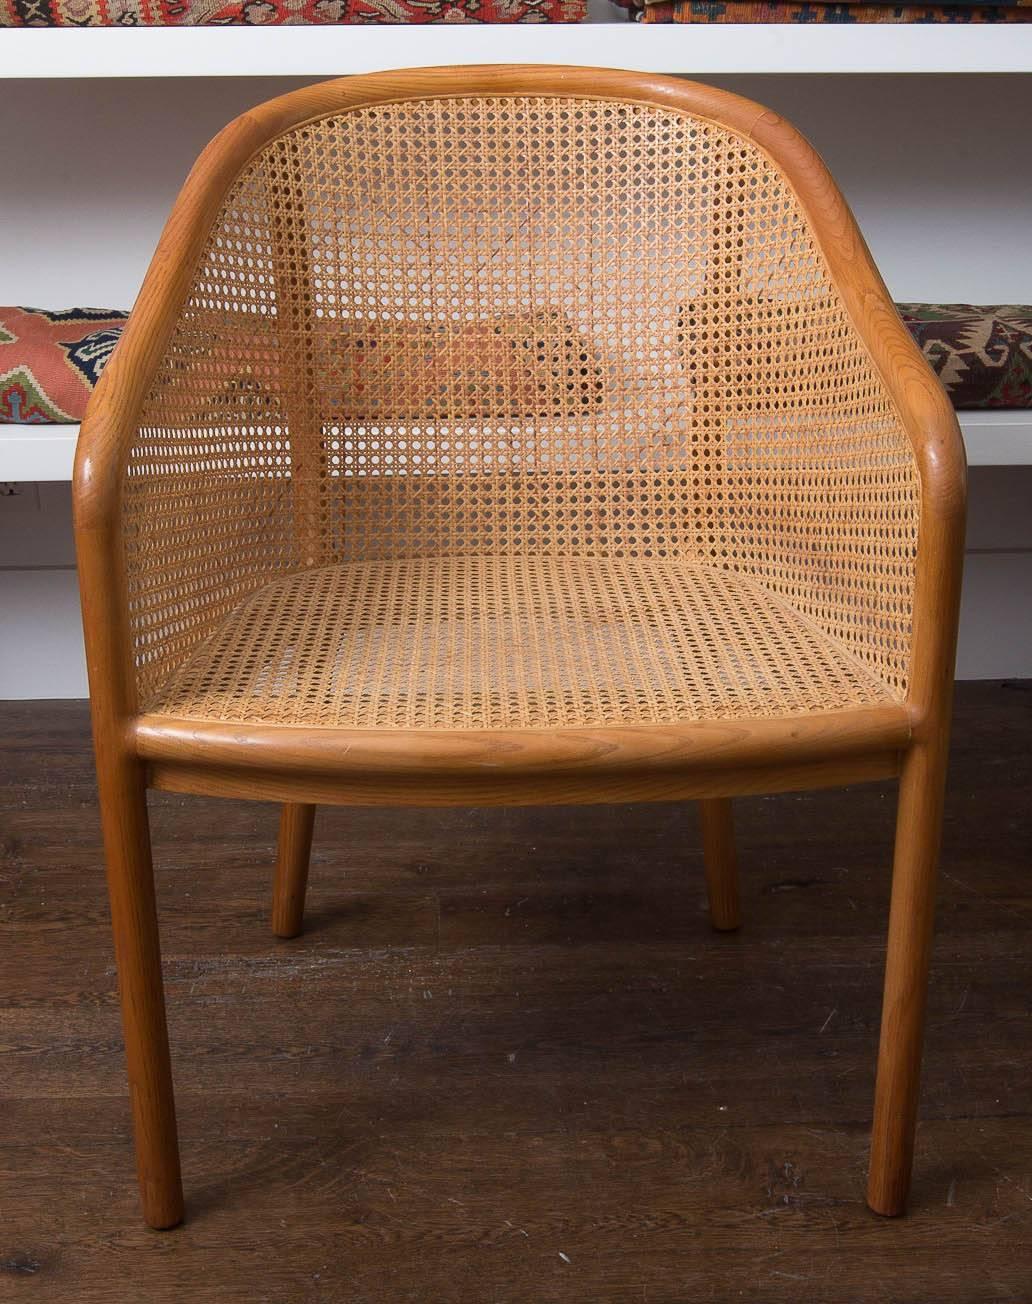 Pair of Ward Bennett chair. Wood and cane.